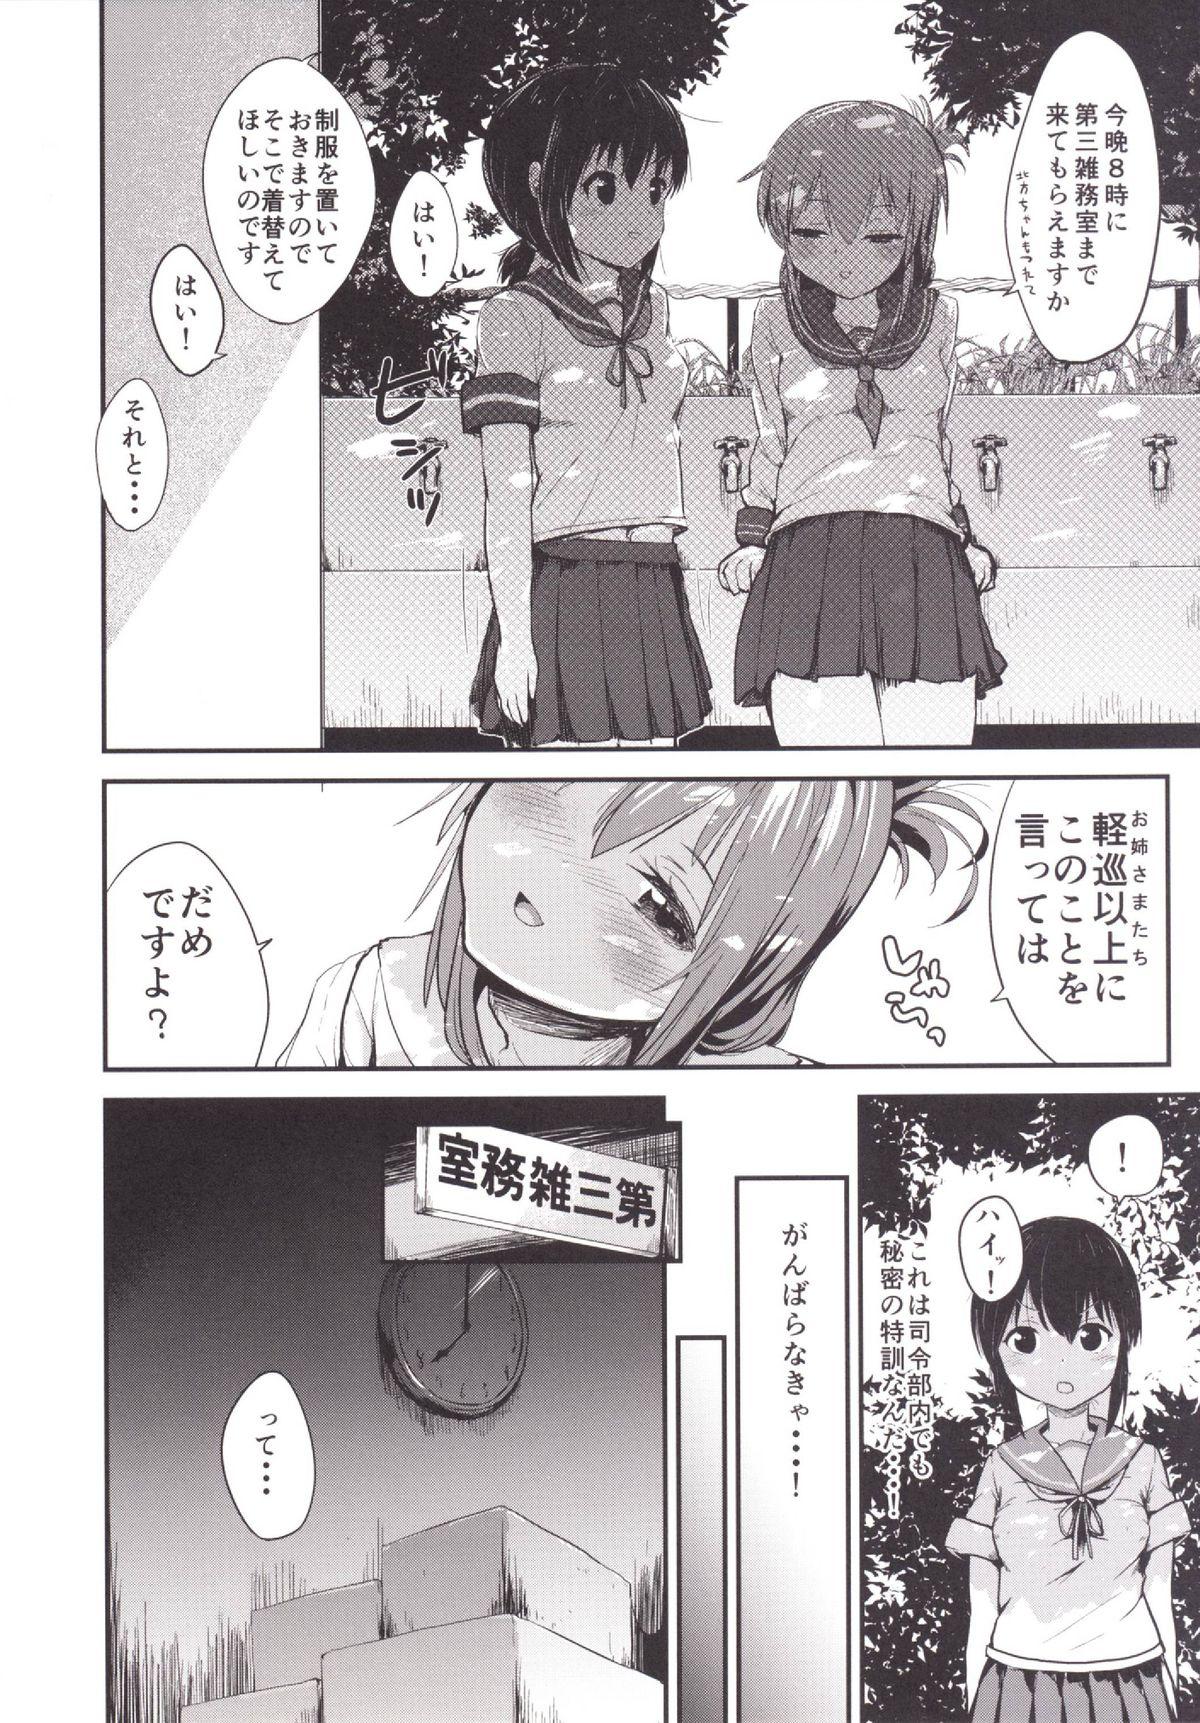 Food Kuchikukan Loliloli Fuuzoku e Youkoso! - Welcome to the destroyer's sex party - Kantai collection Twink - Page 7